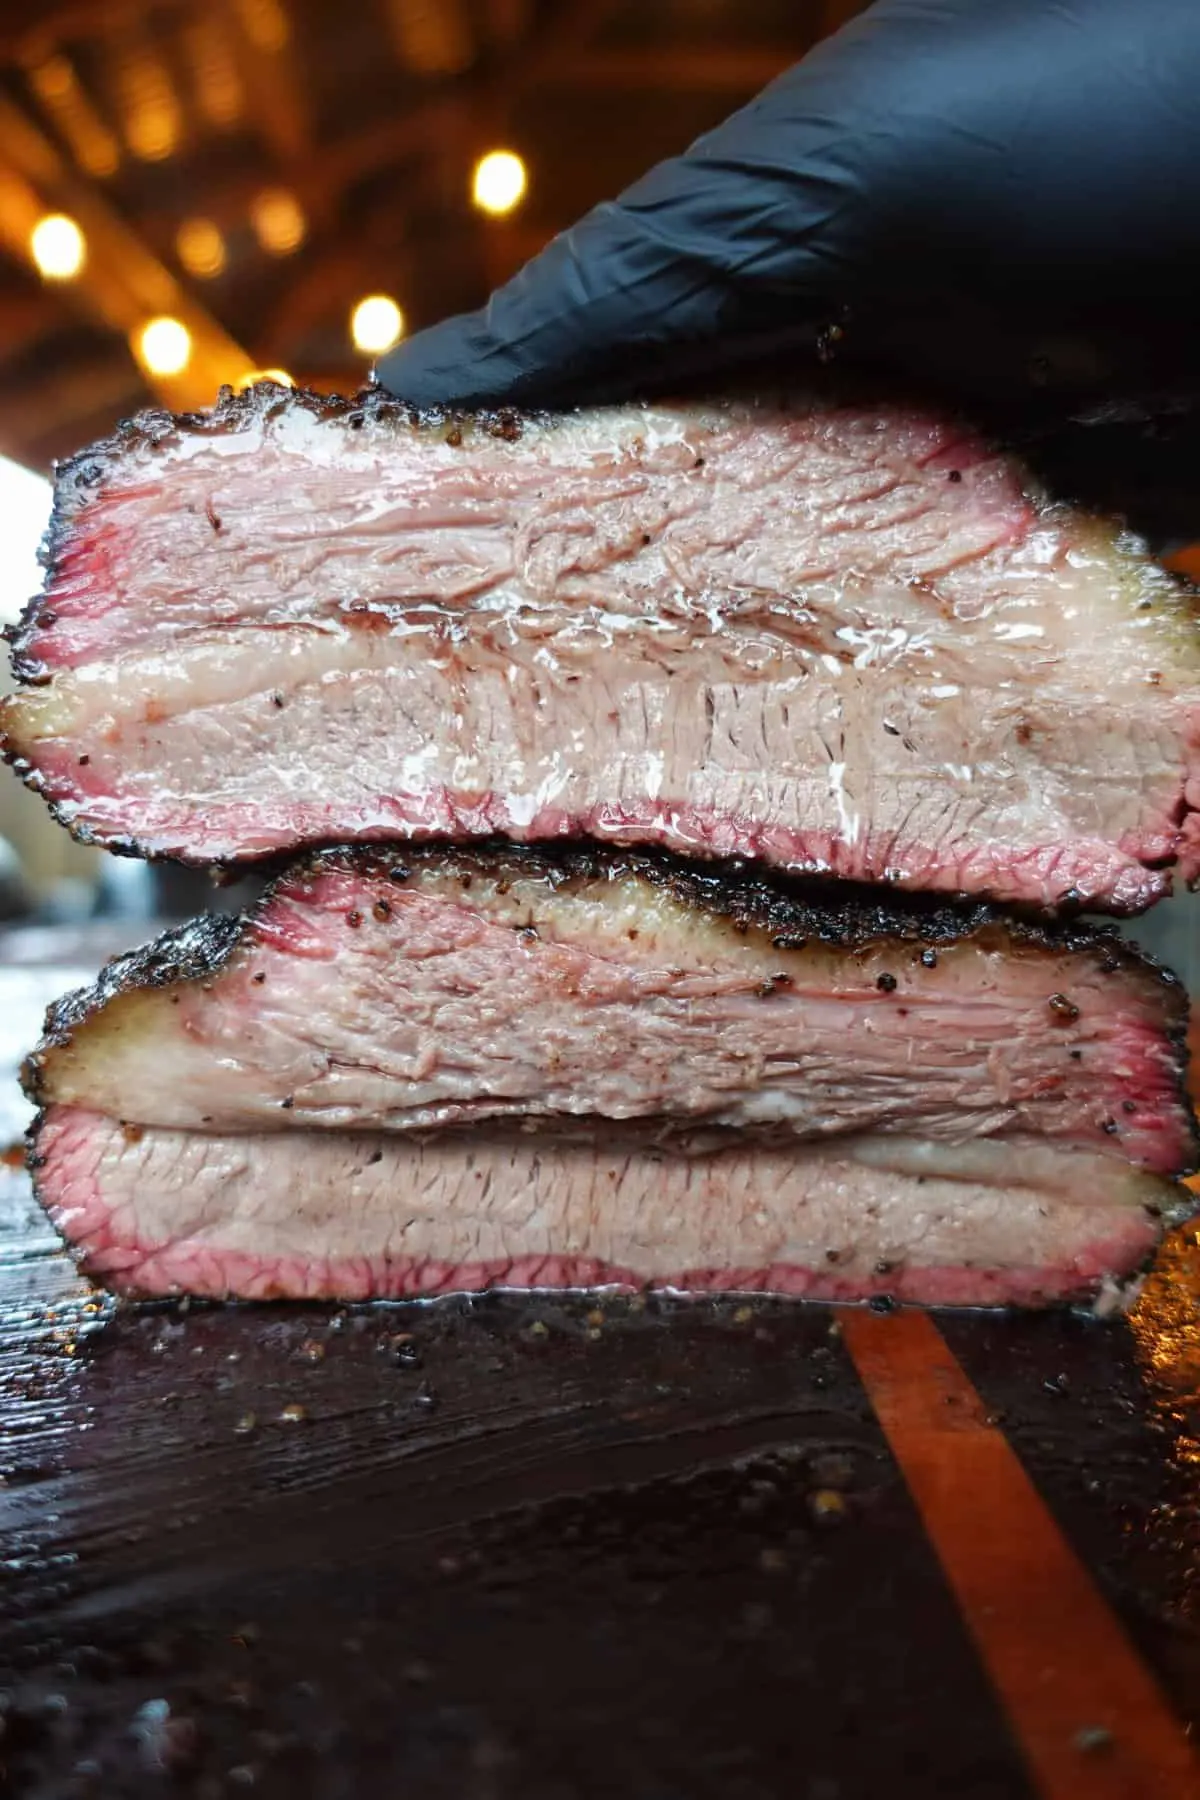 when is smoked brisket done - How do I know my smoked brisket is done